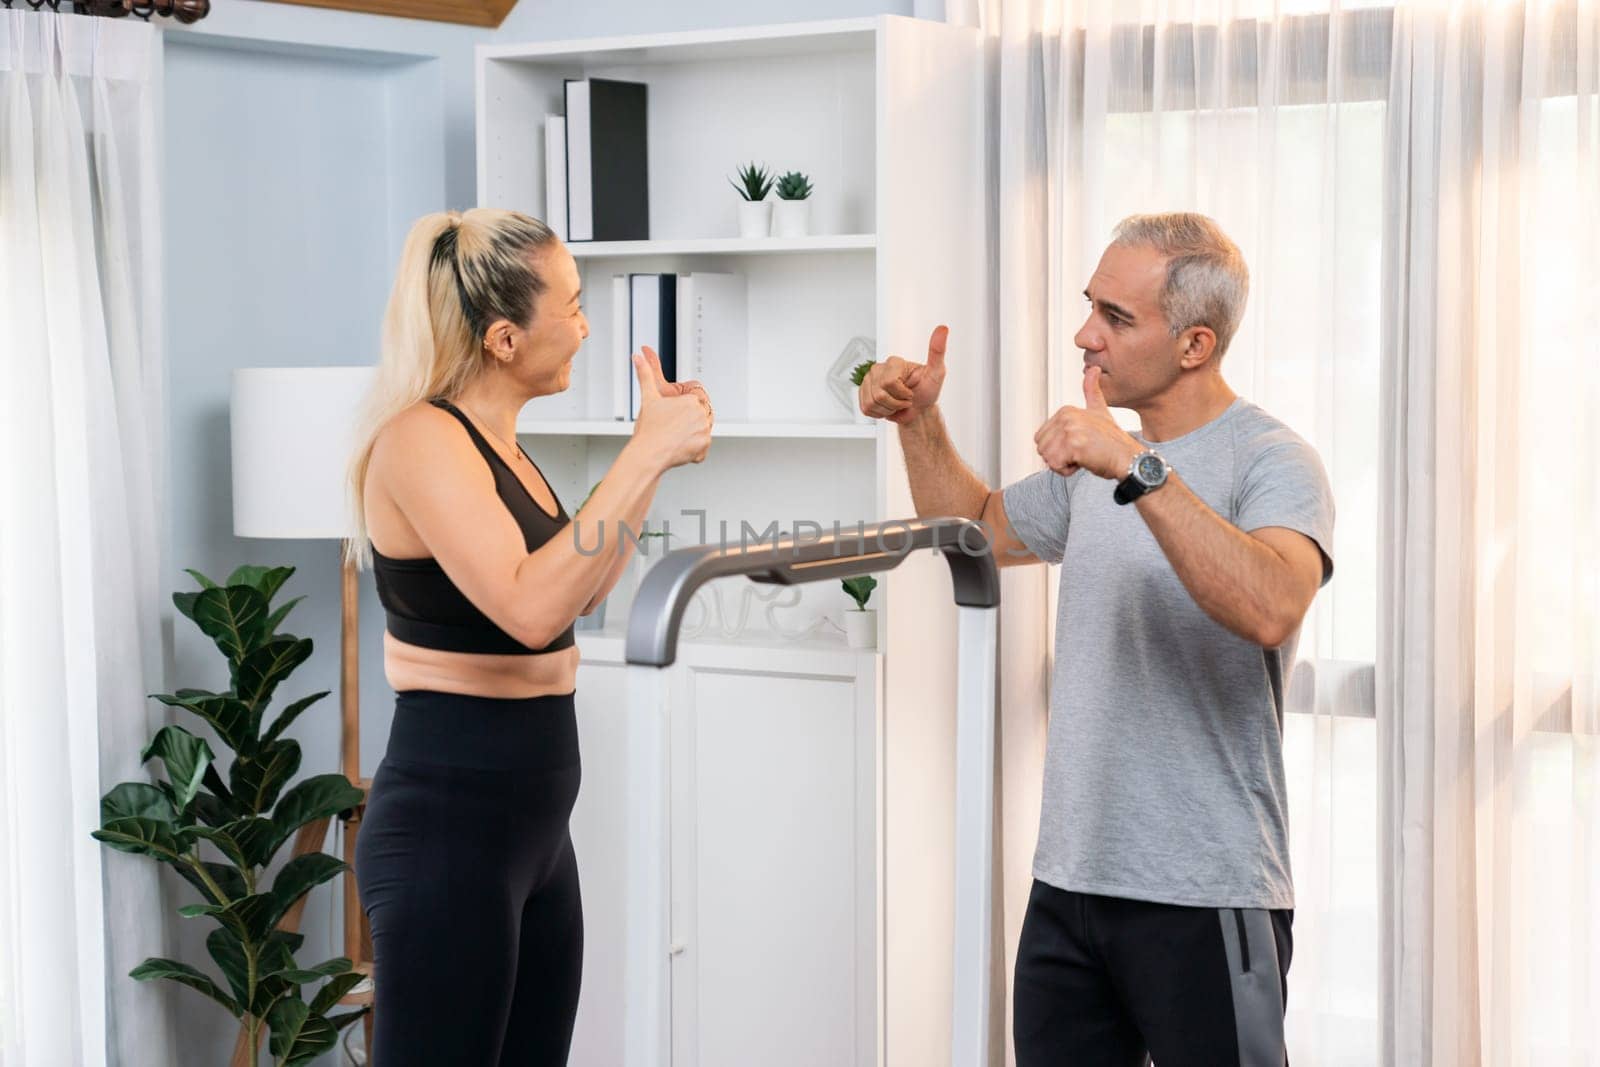 Athletic and sporty senior couple portrait in sportswear with successful or celebrating after overcome struggle posture as home exercise concept with healthy fit body lifestyle after retirement. Clout